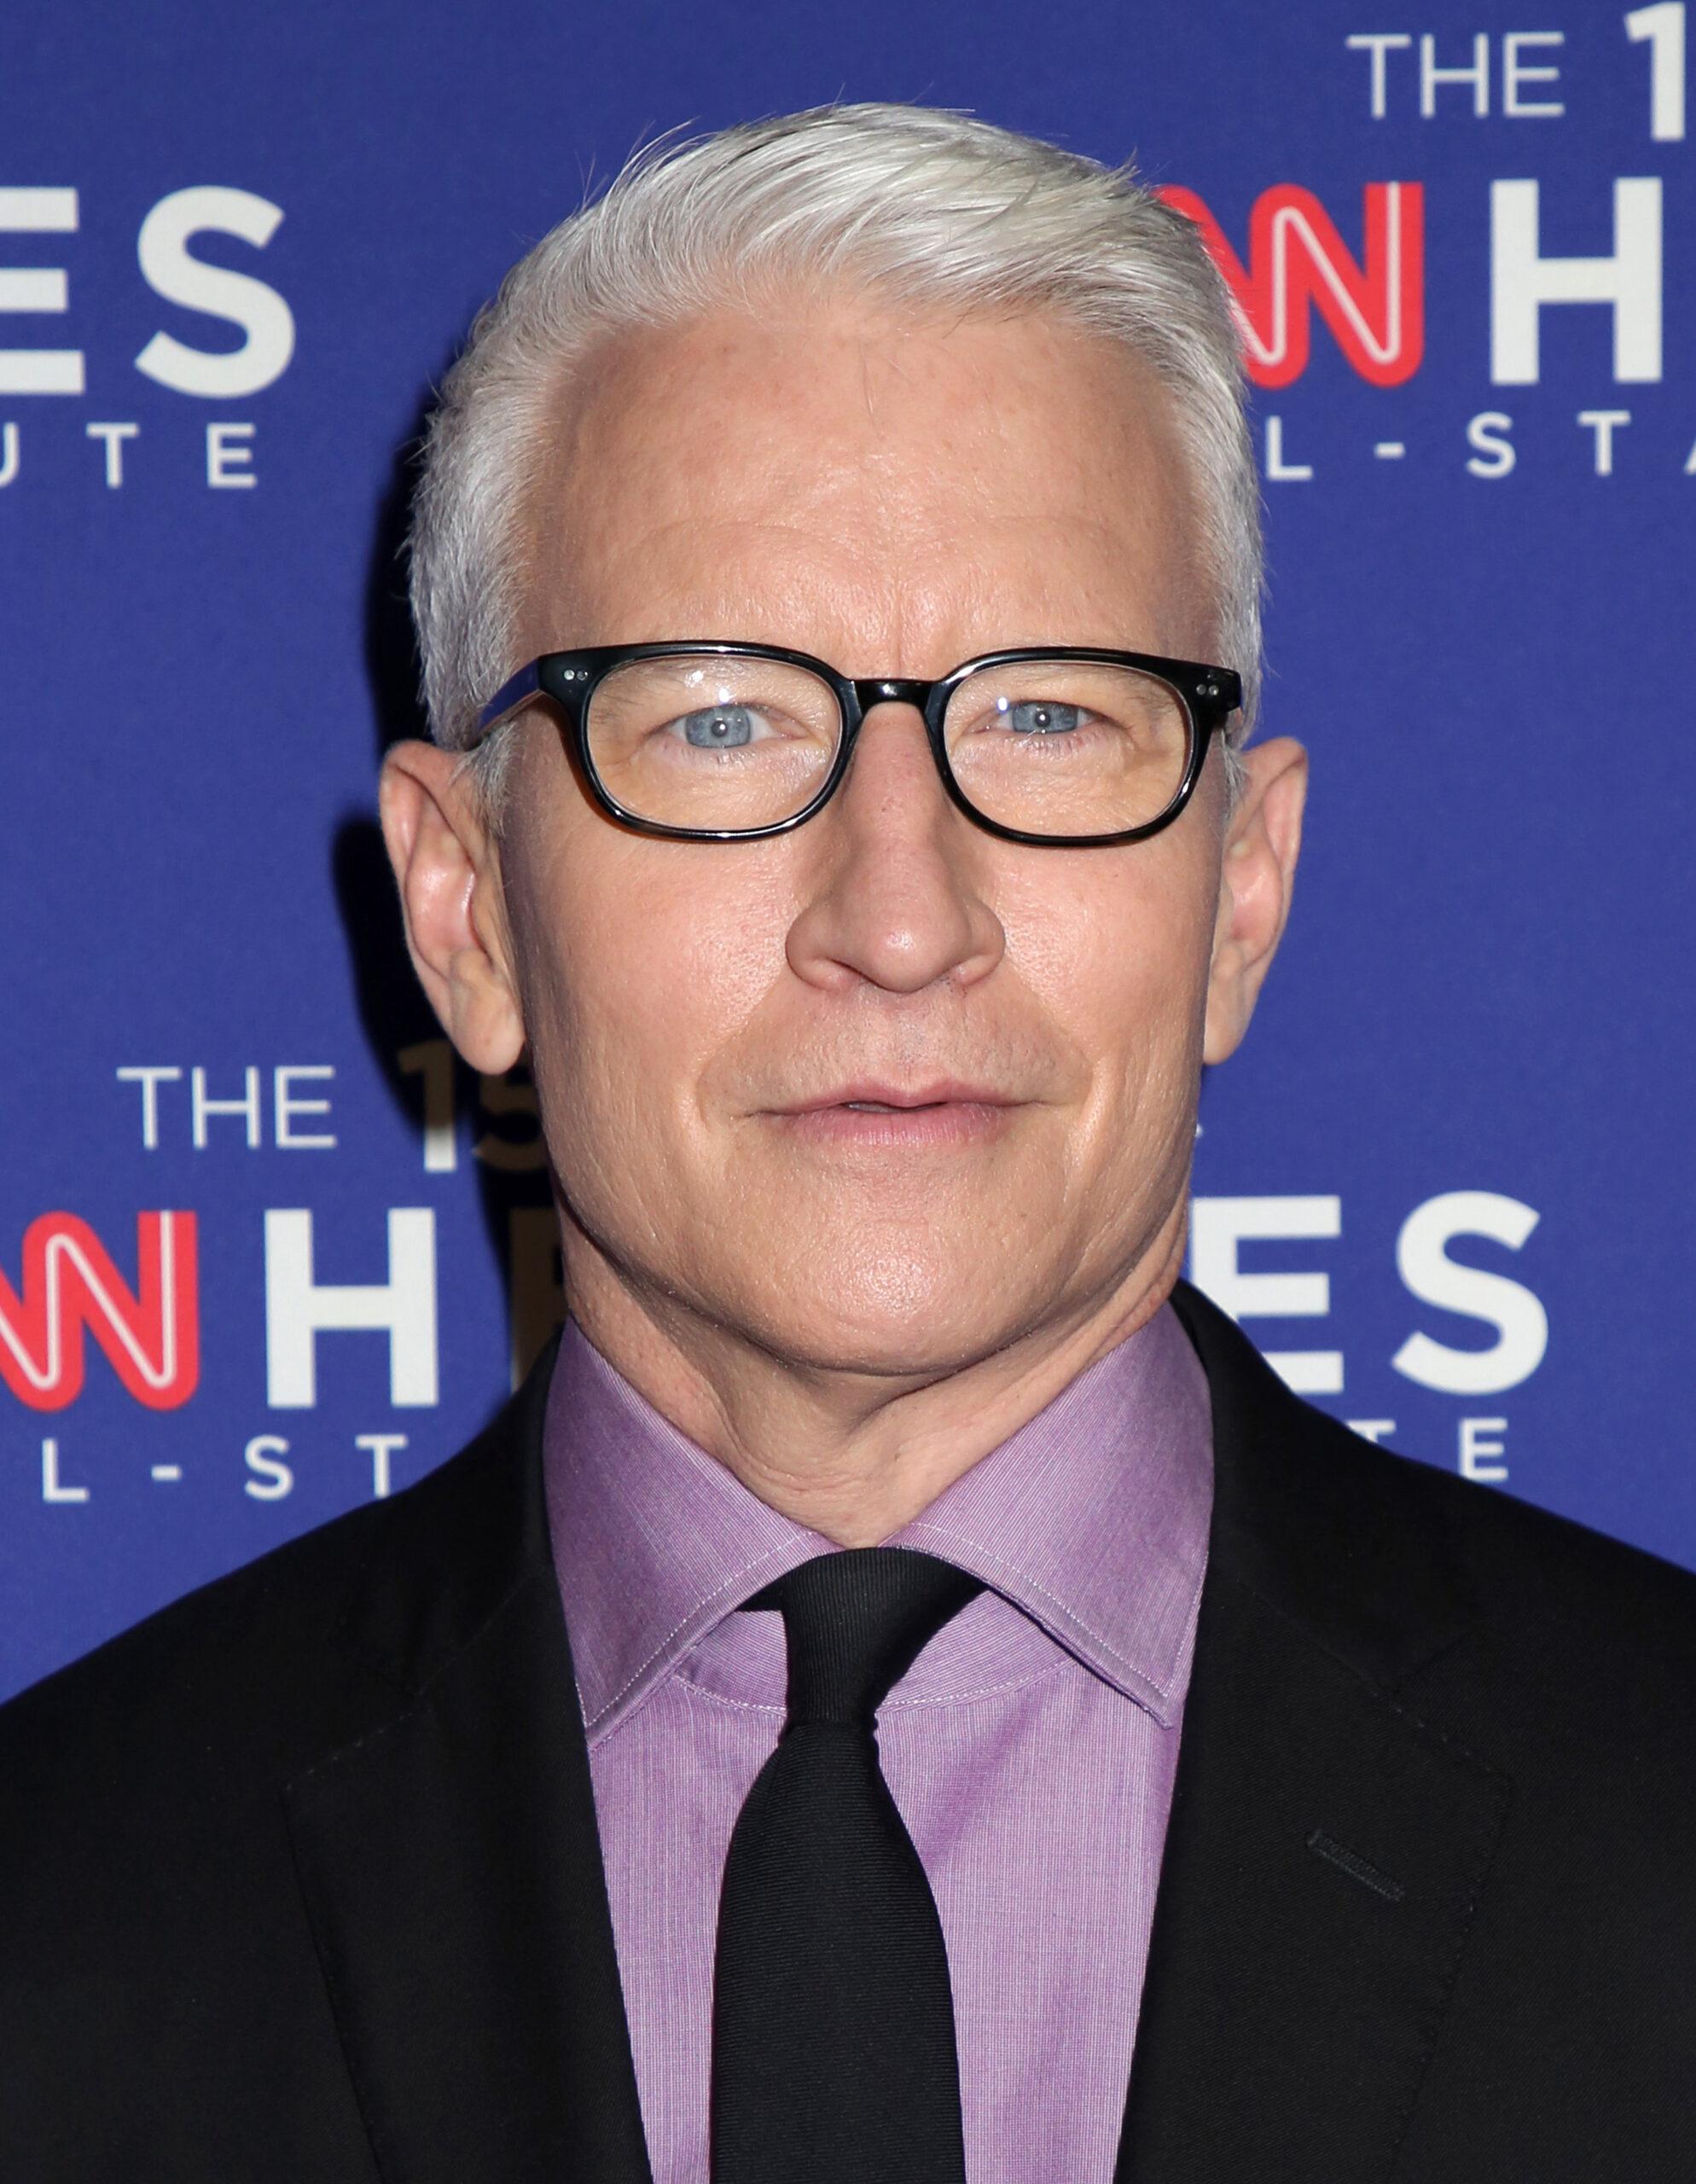 Anderson Cooper at the 15th Annual CNN Heroes All-Star Tribute